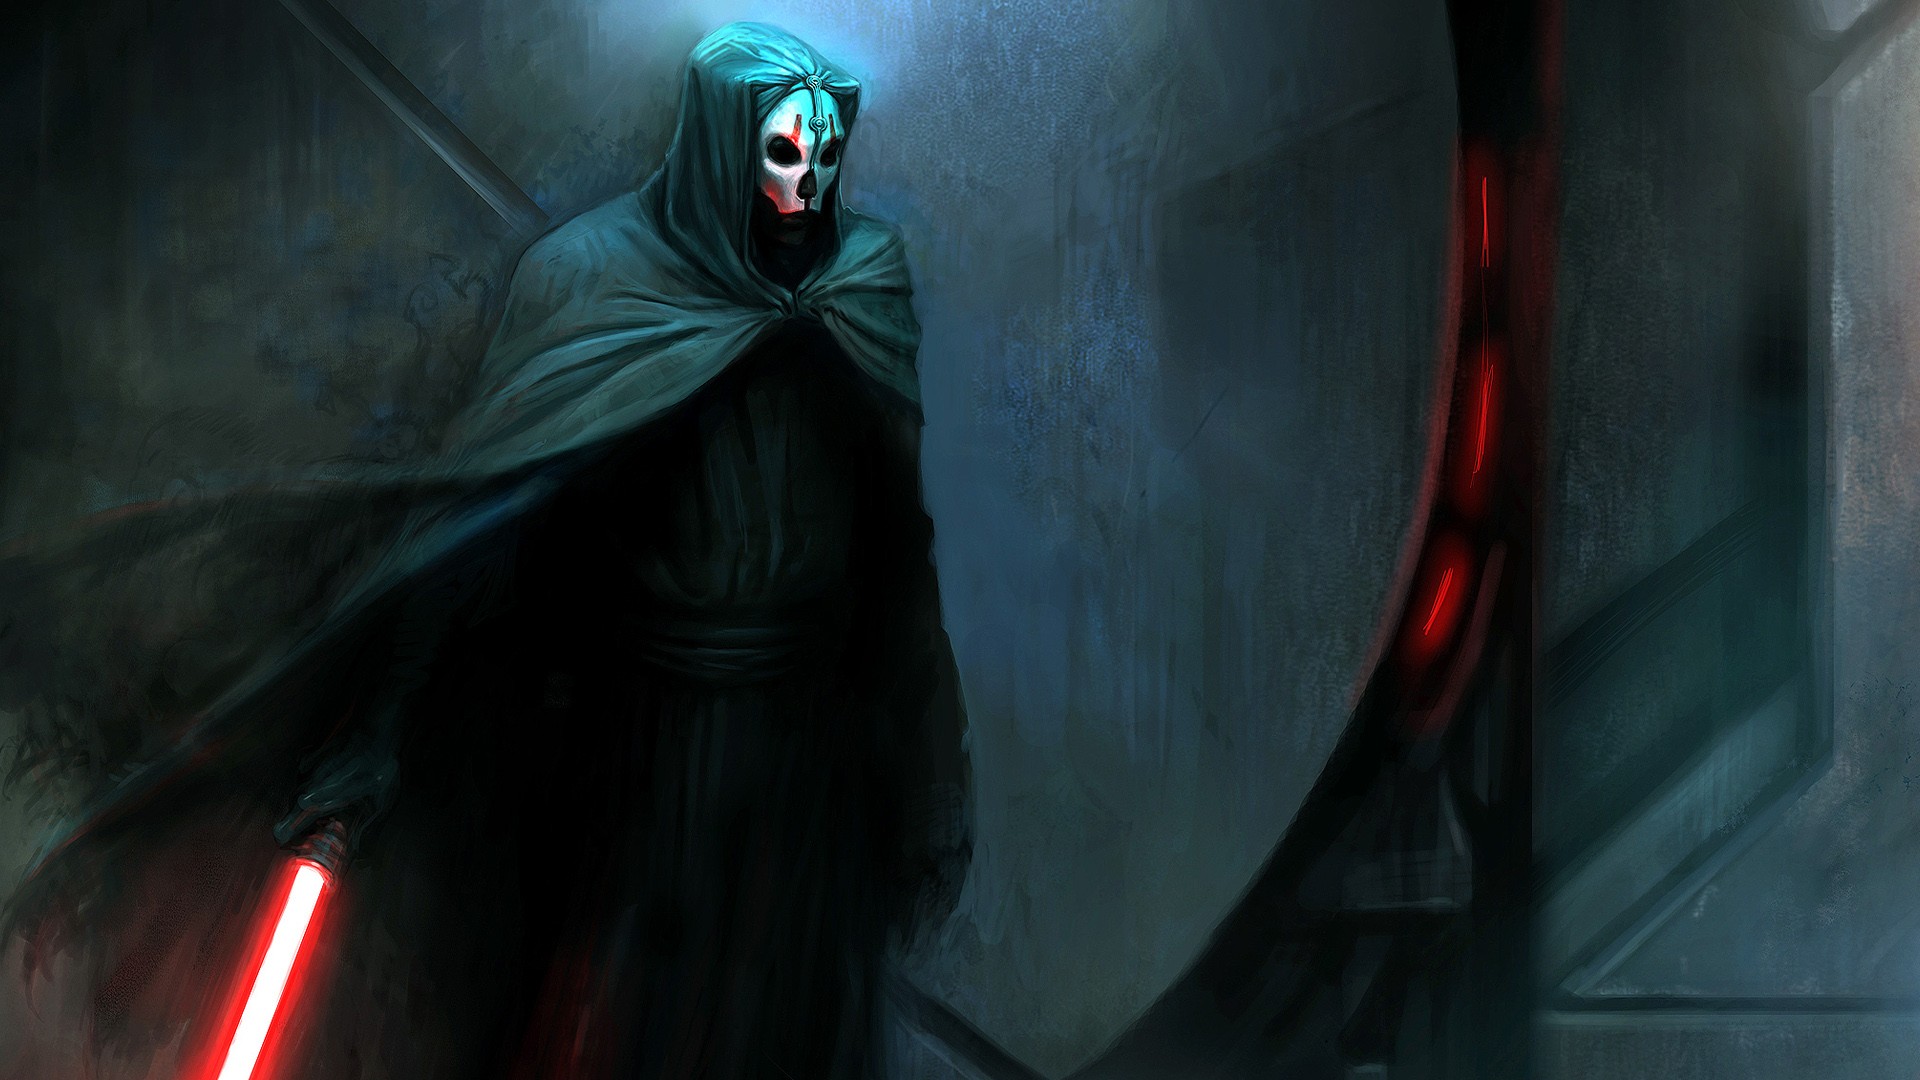 General 1920x1080 Star Wars Sith Darth Nihilus lightsaber Star Wars: Knights of the Old Republic II: The Sith Lords mask video games PC gaming video game art science fiction